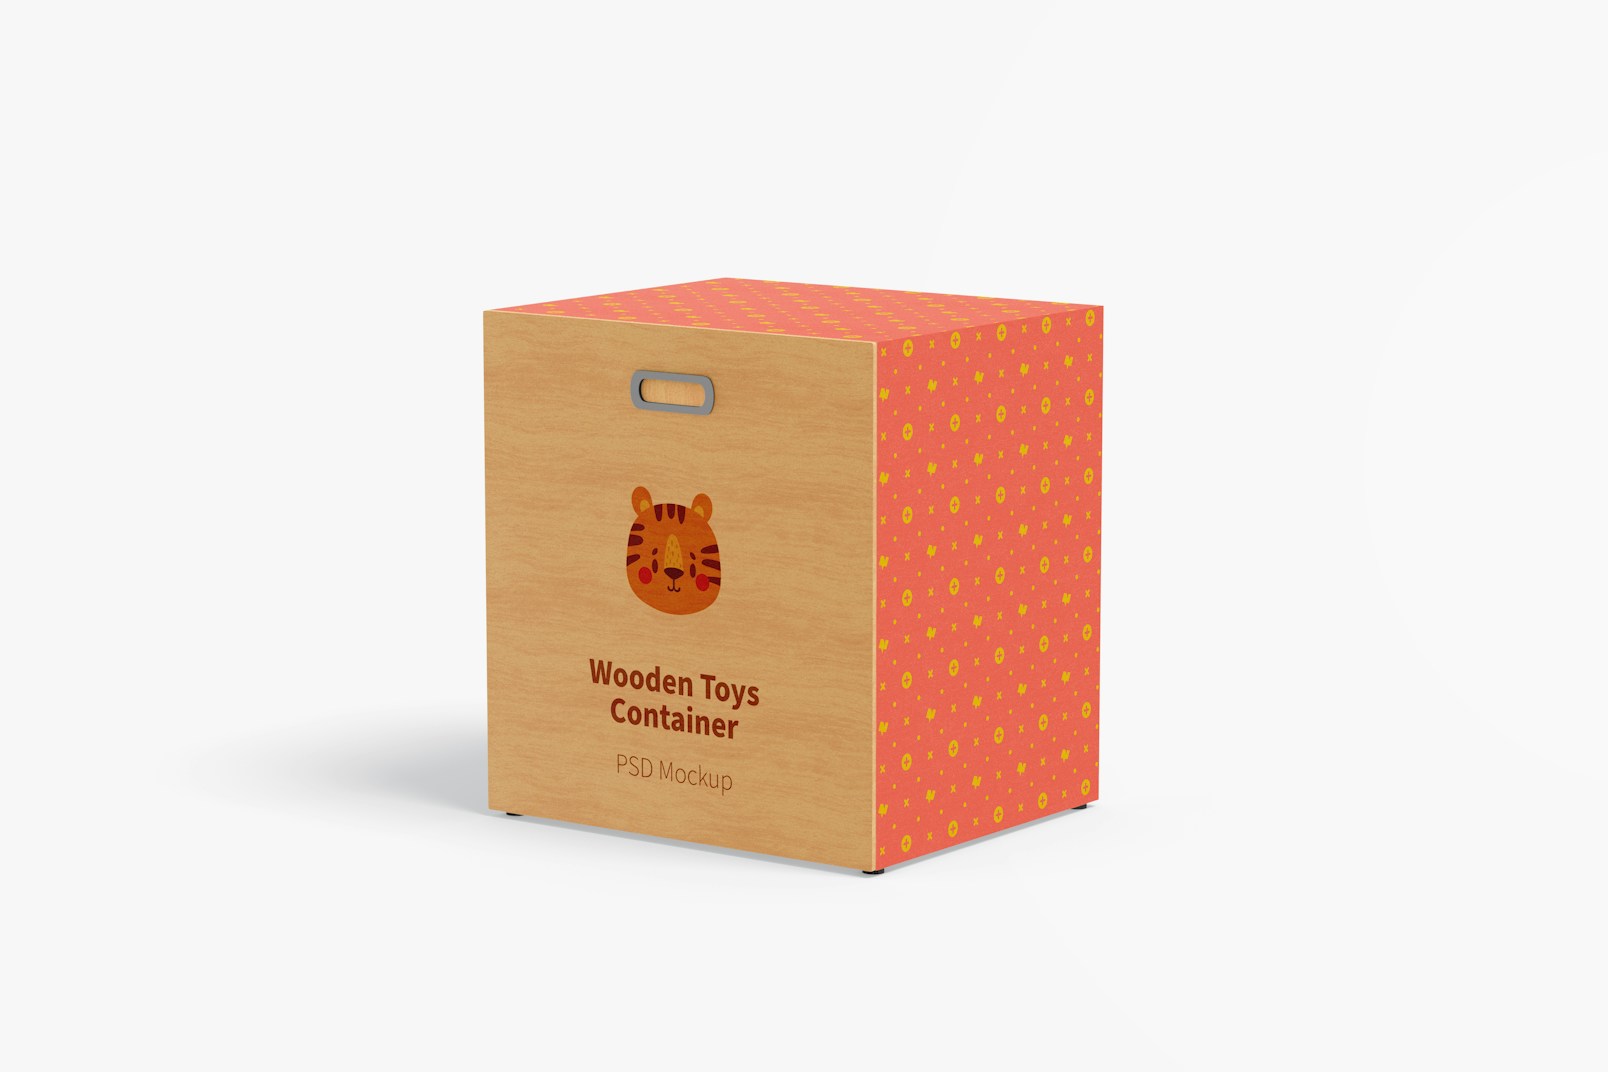 Wooden Toys Container with Wheels Mockup